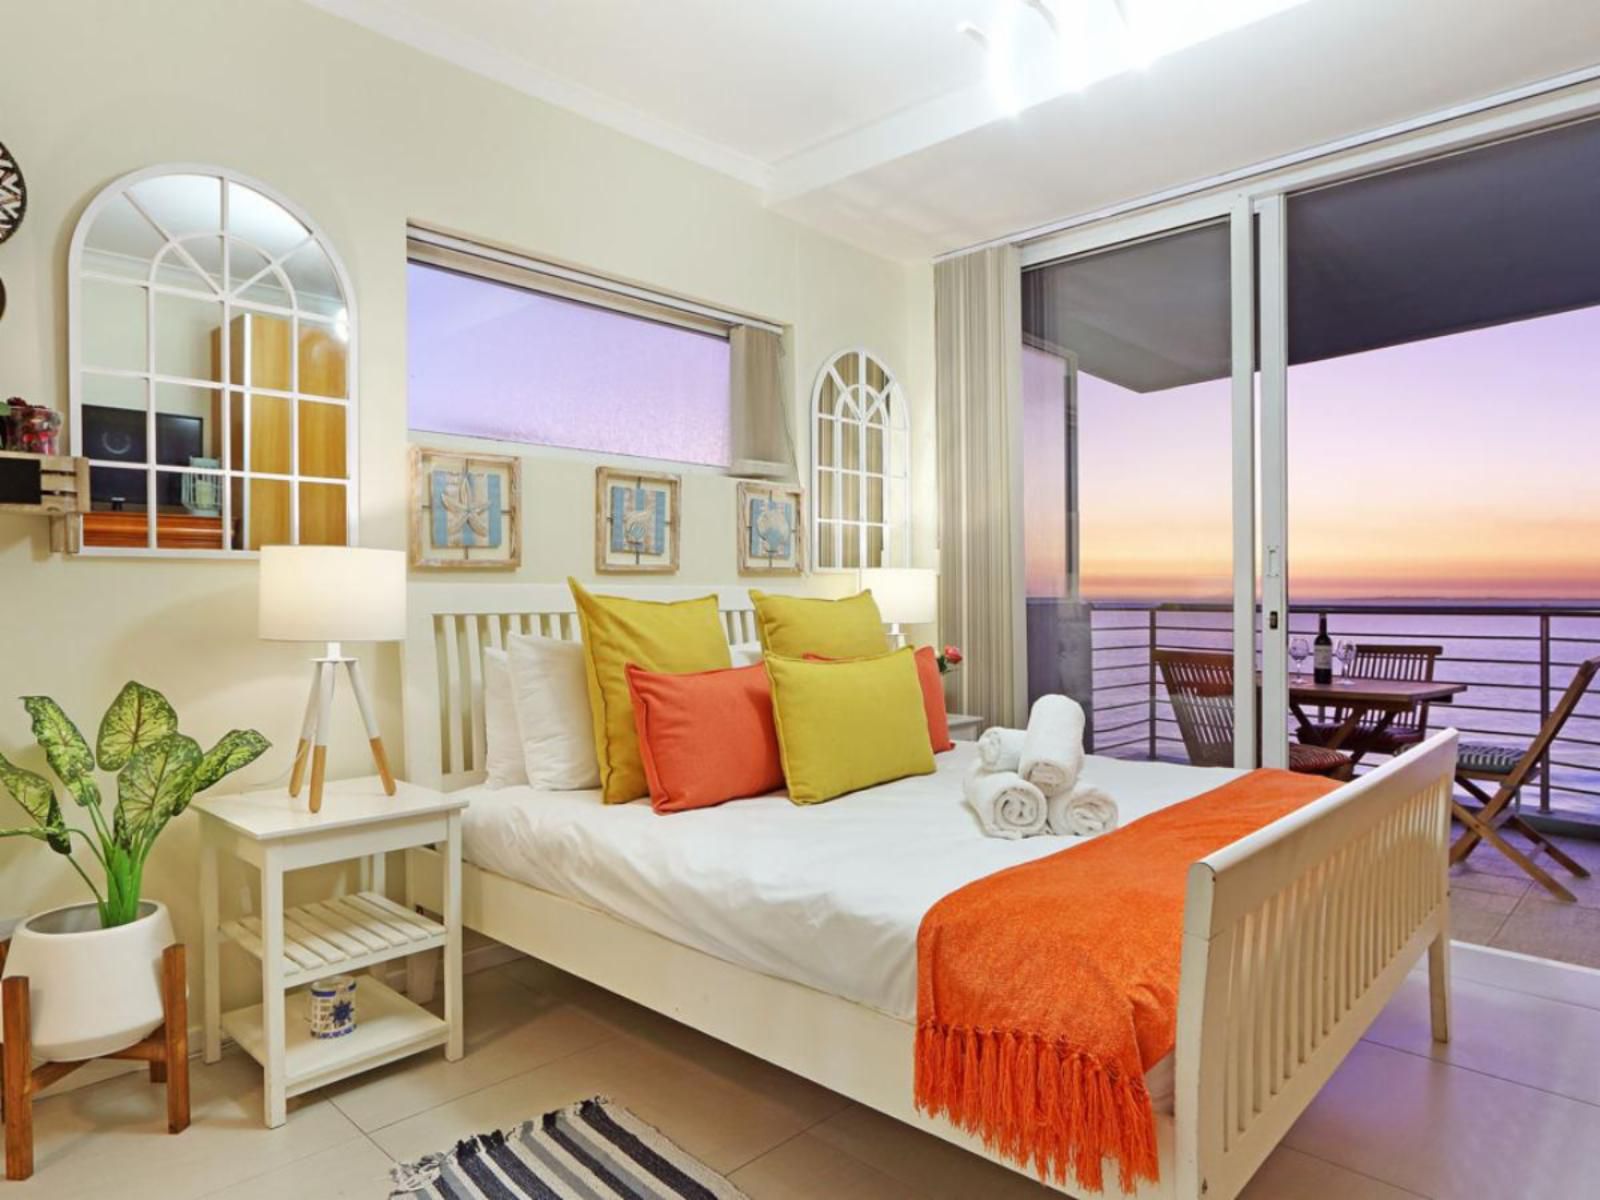 Horizon Bay 1201 By Hostagents Bloubergrant Blouberg Western Cape South Africa Bedroom